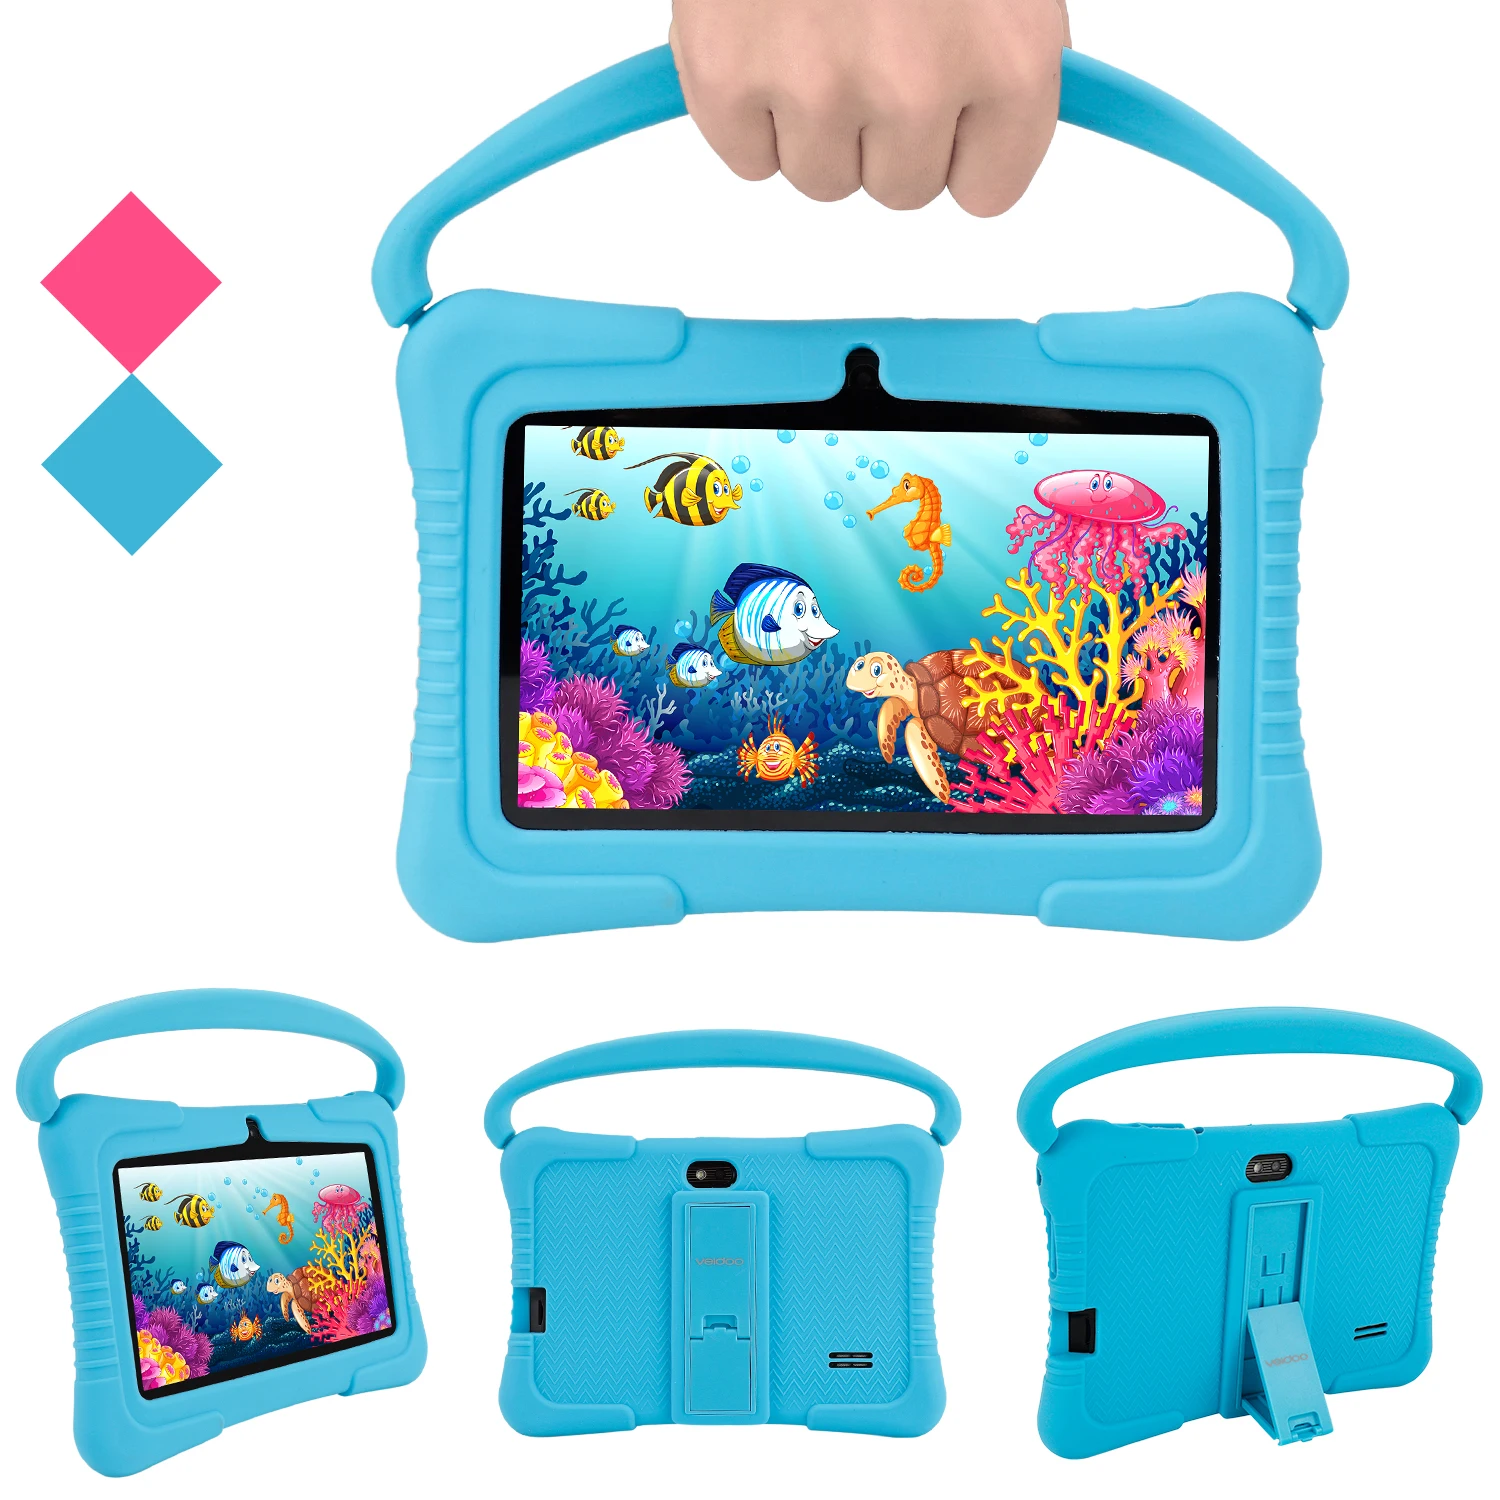 

2022 Cheapest Tablet Q8 Without Dual Sim 7 Inches Kids Educational Tablet Pc